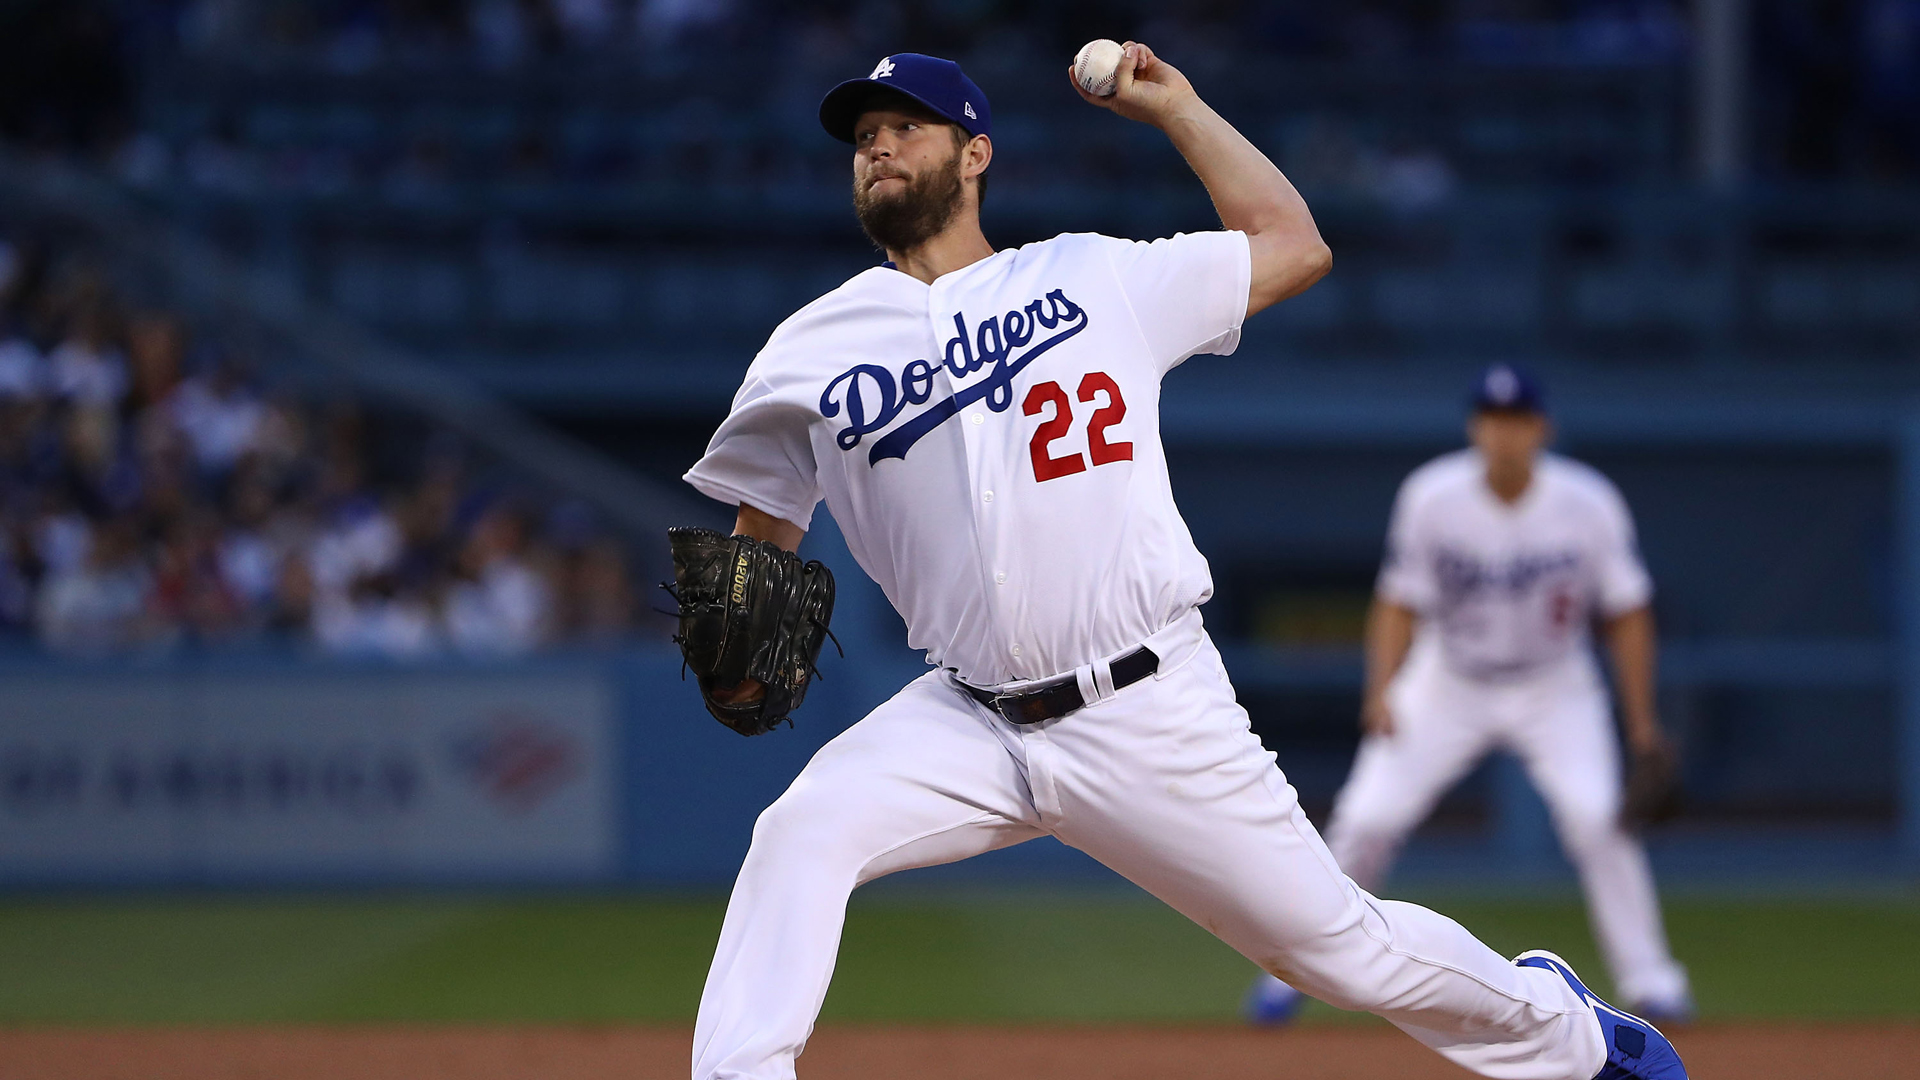 Pitcher Clayton Kershaw #22 of the Los Angeles Dodgers pitches in the second inning of the MLB game against the Philadelphia Phillies at Dodger Stadium on June 01, 2019 in Los Angeles, California. (Credit: Victor Decolongon/Getty Images)